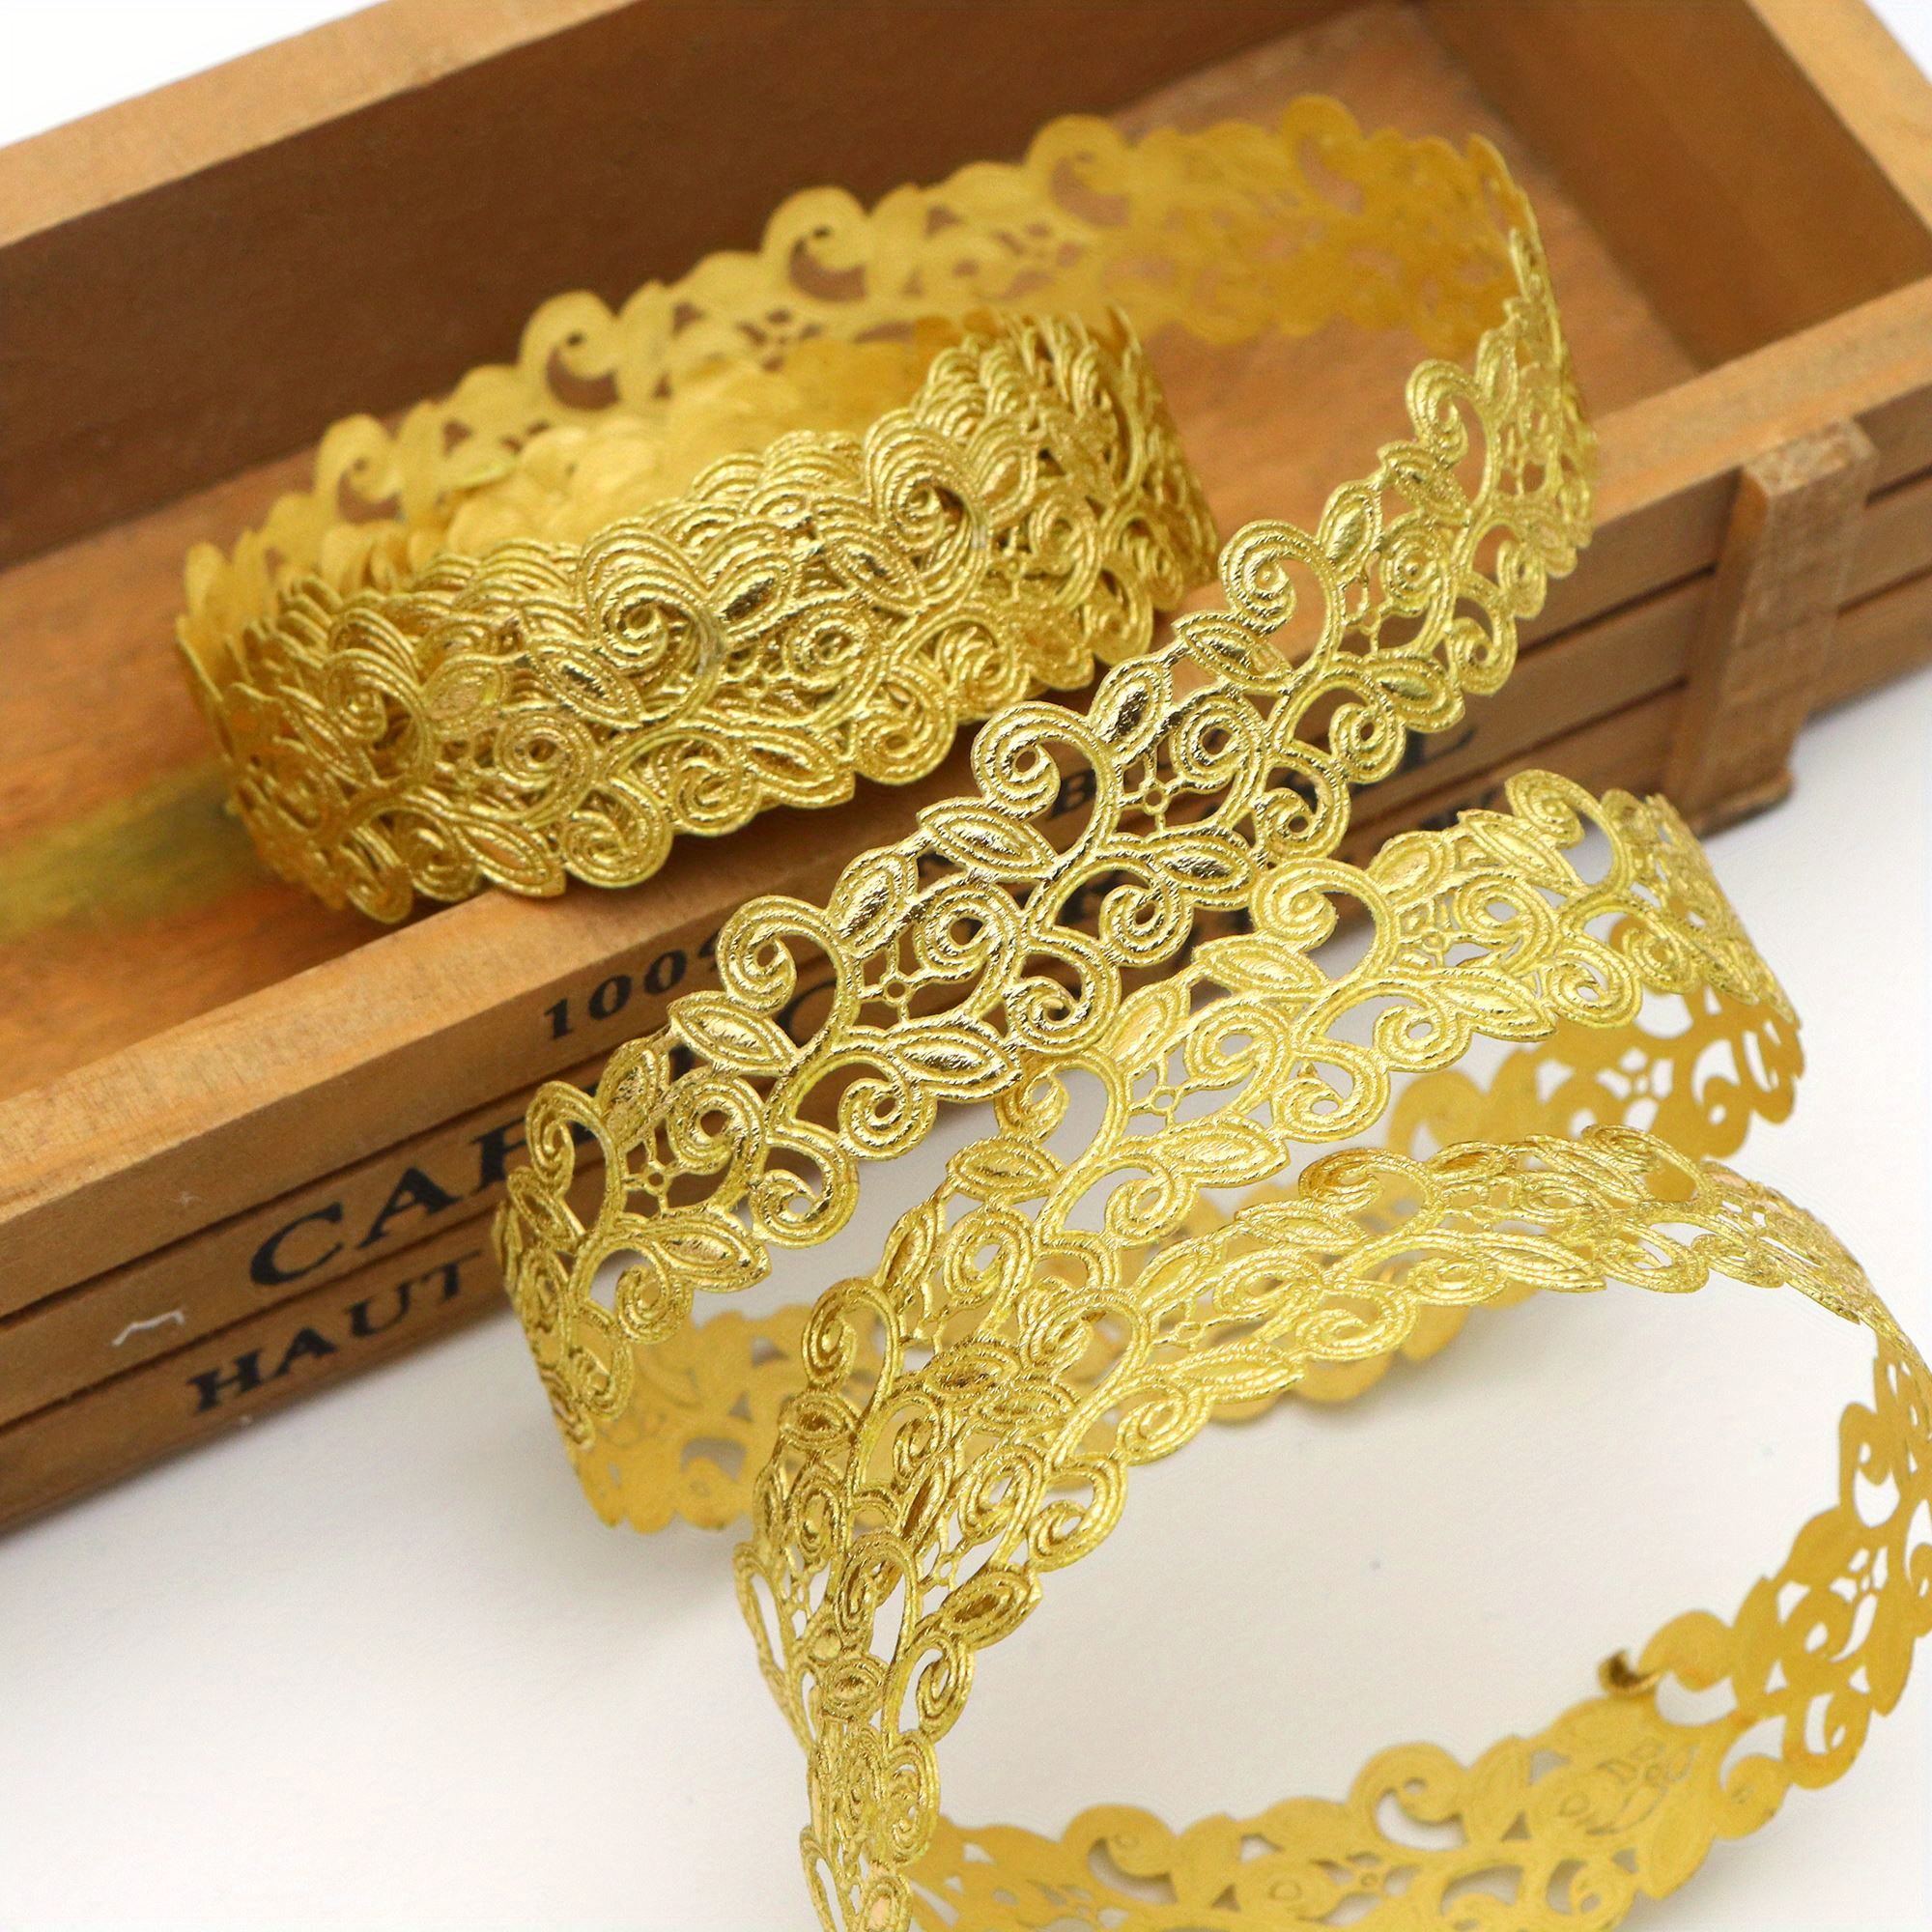 

1 Roll 5 Yards 0.87in/22mm Golden Hollow Cut Out Flower Lace Ribbon, Lace Trim, Diy Scrapbooking Gift Wrapping Sewing Birthday Party Home Decor